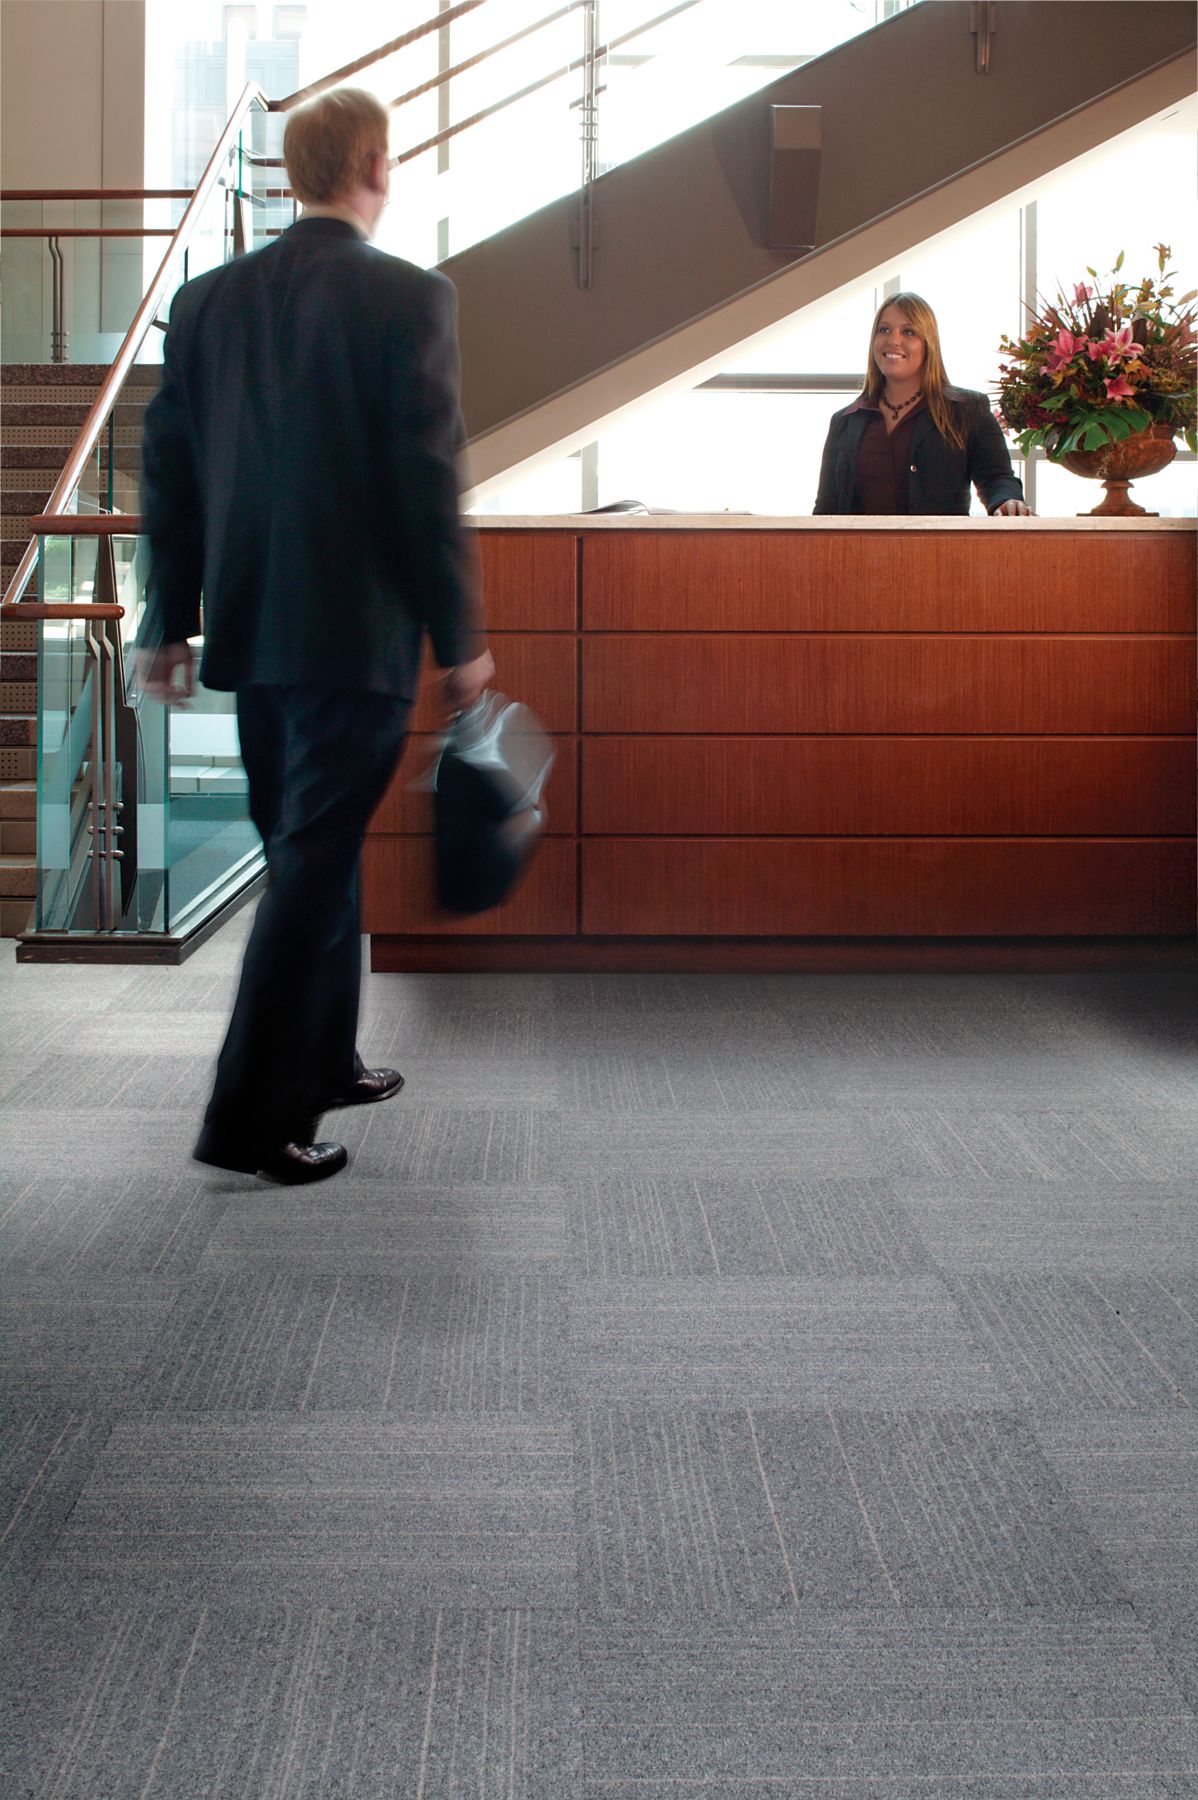 interface Flannel carpet tile in office reception area with man and woman numéro d’image 2